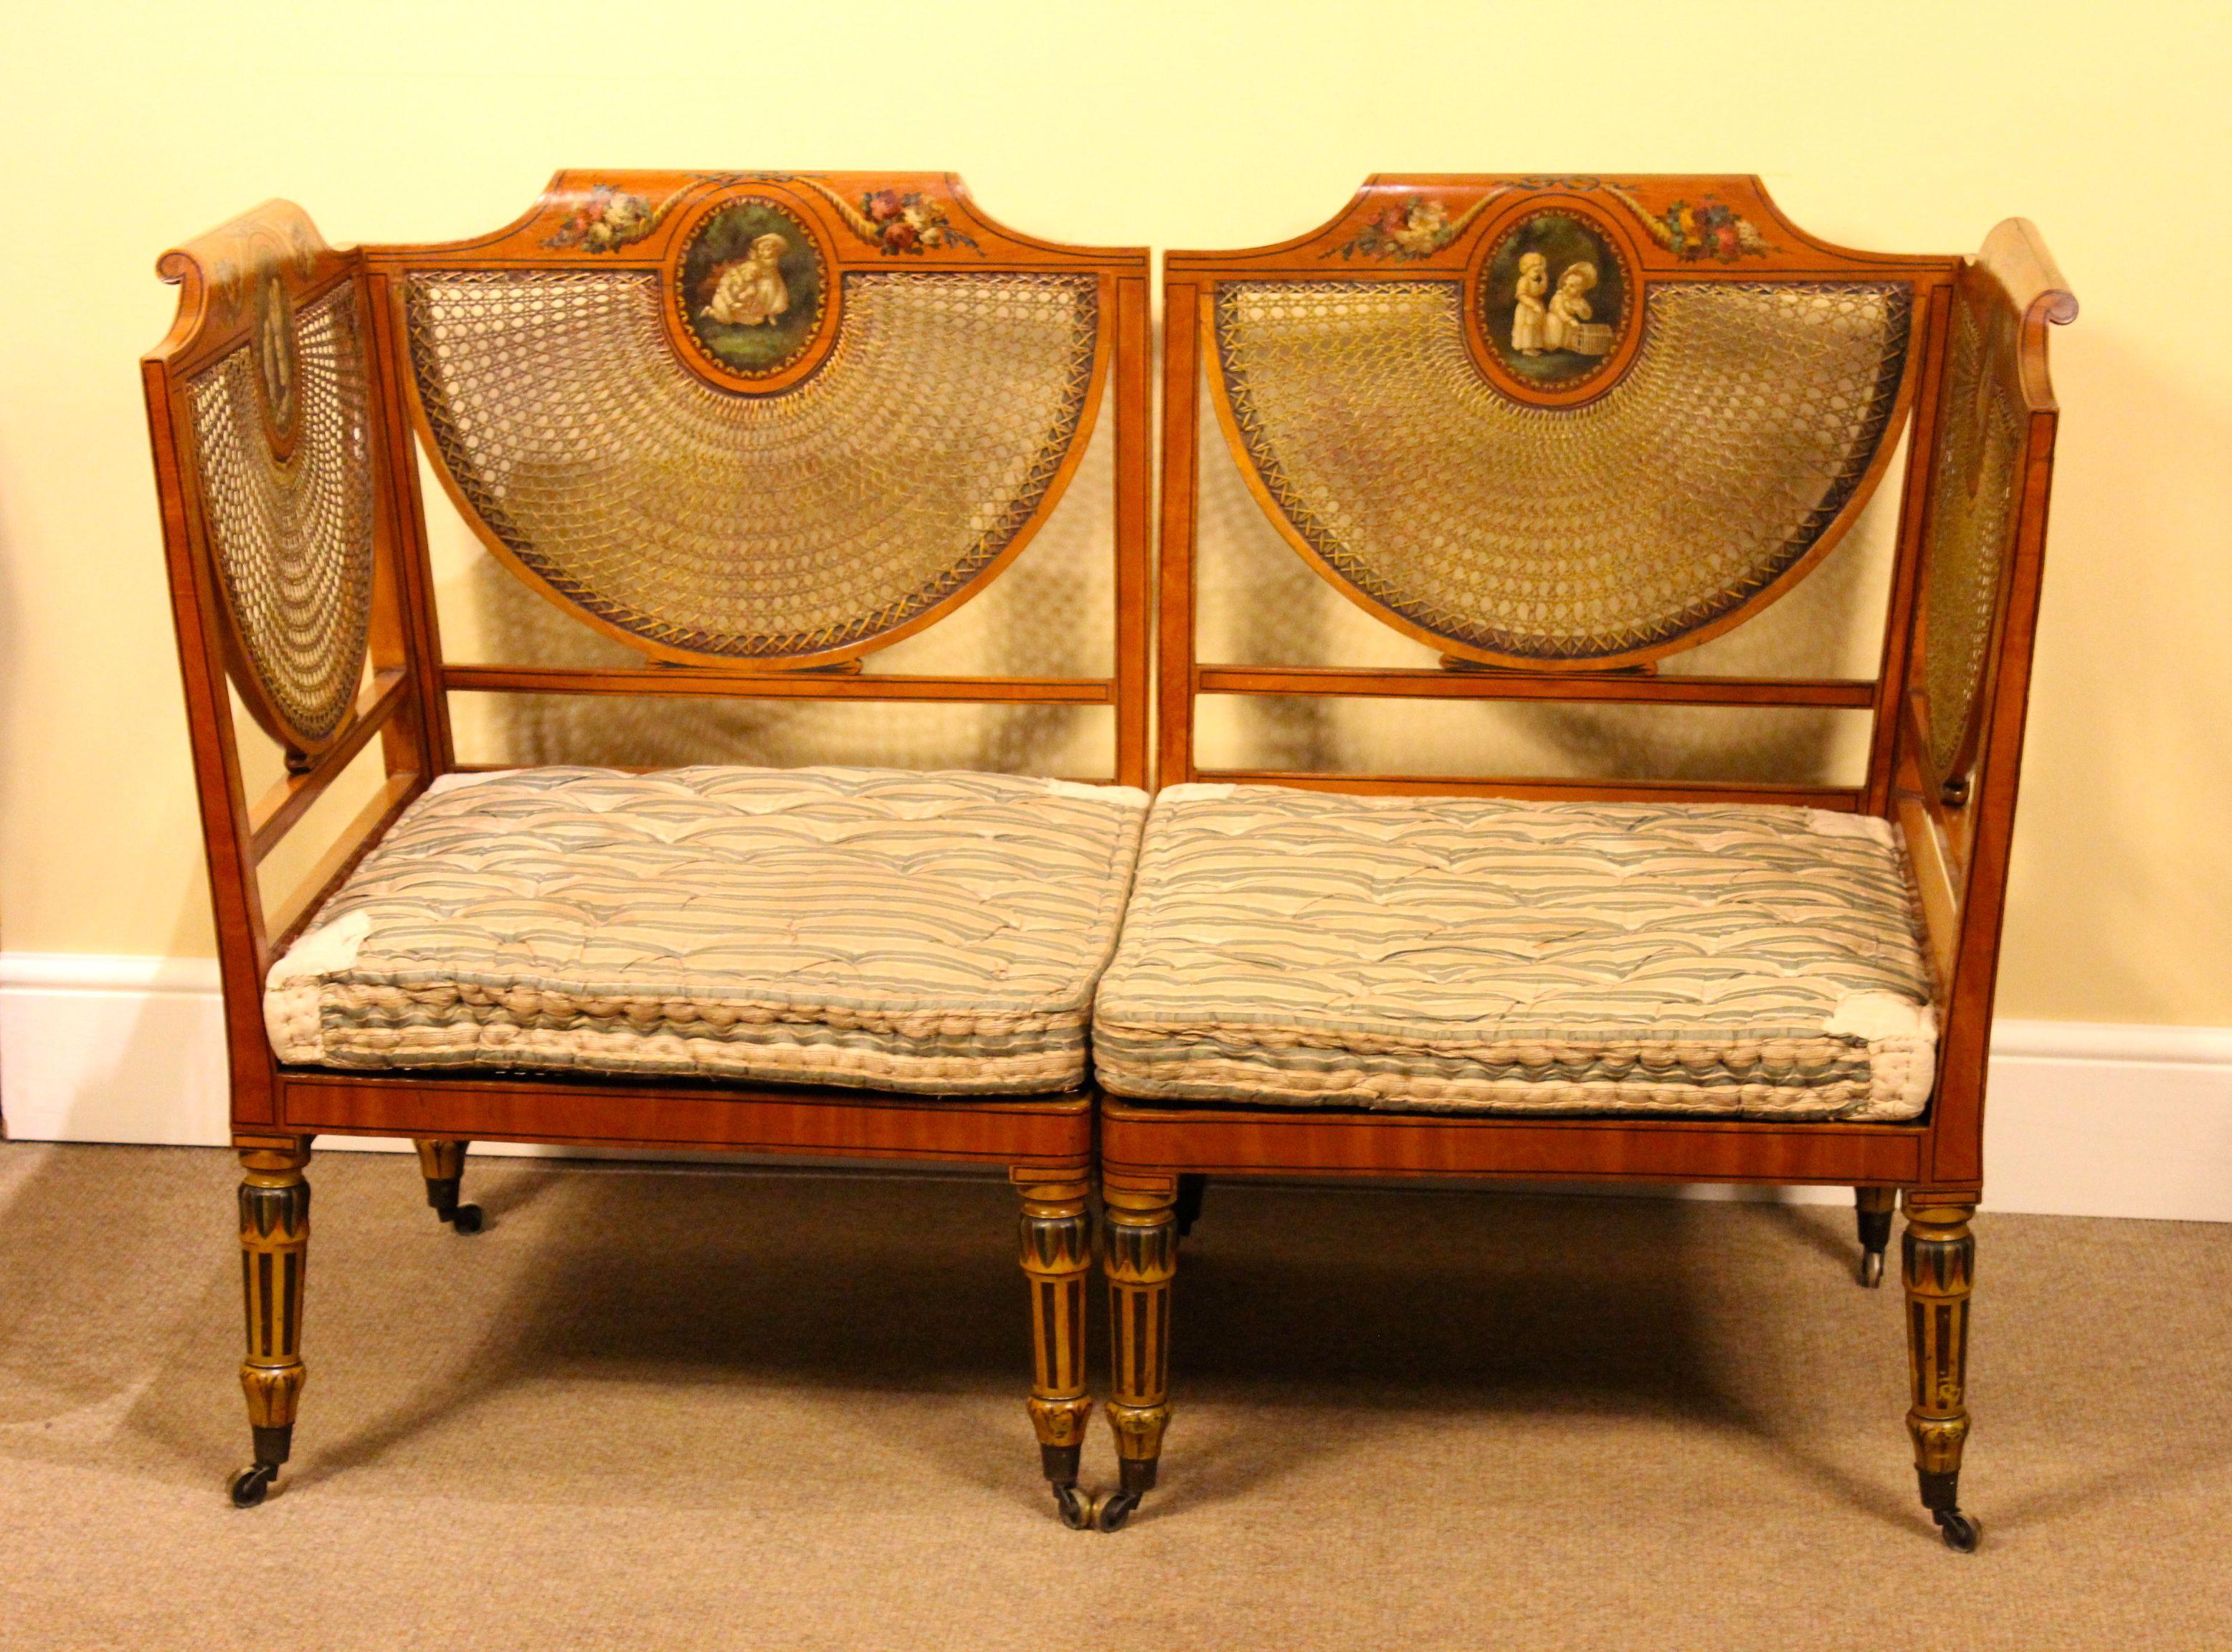 5796
Pair of late 19thc. Satinwood Corner Seats
That unite to form a sofa. Originally made
For Palace Court, Bayswater with painted scenes
On each panel with floral decoration & painted
Legs.
Measures: 52.5”W x 36” H x 26” D
133cm W x 92cm H